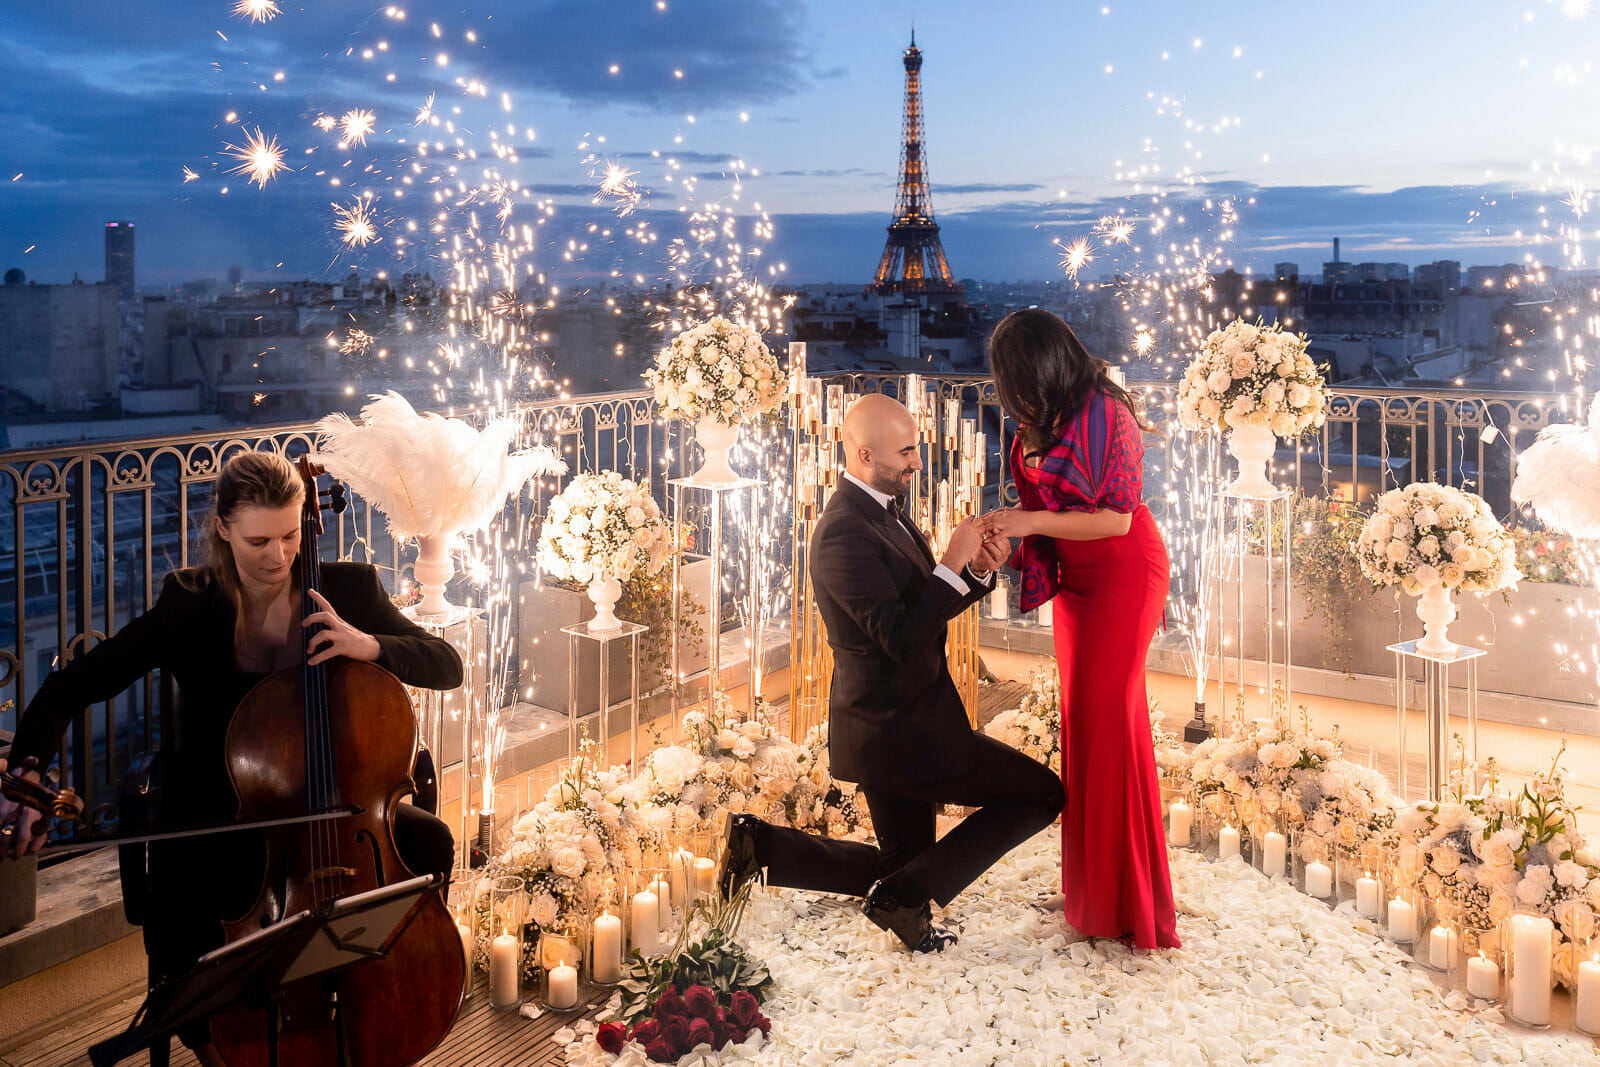 Winter-white Peninsula Hotel Paris Proposal with musicians and fireworks fountains